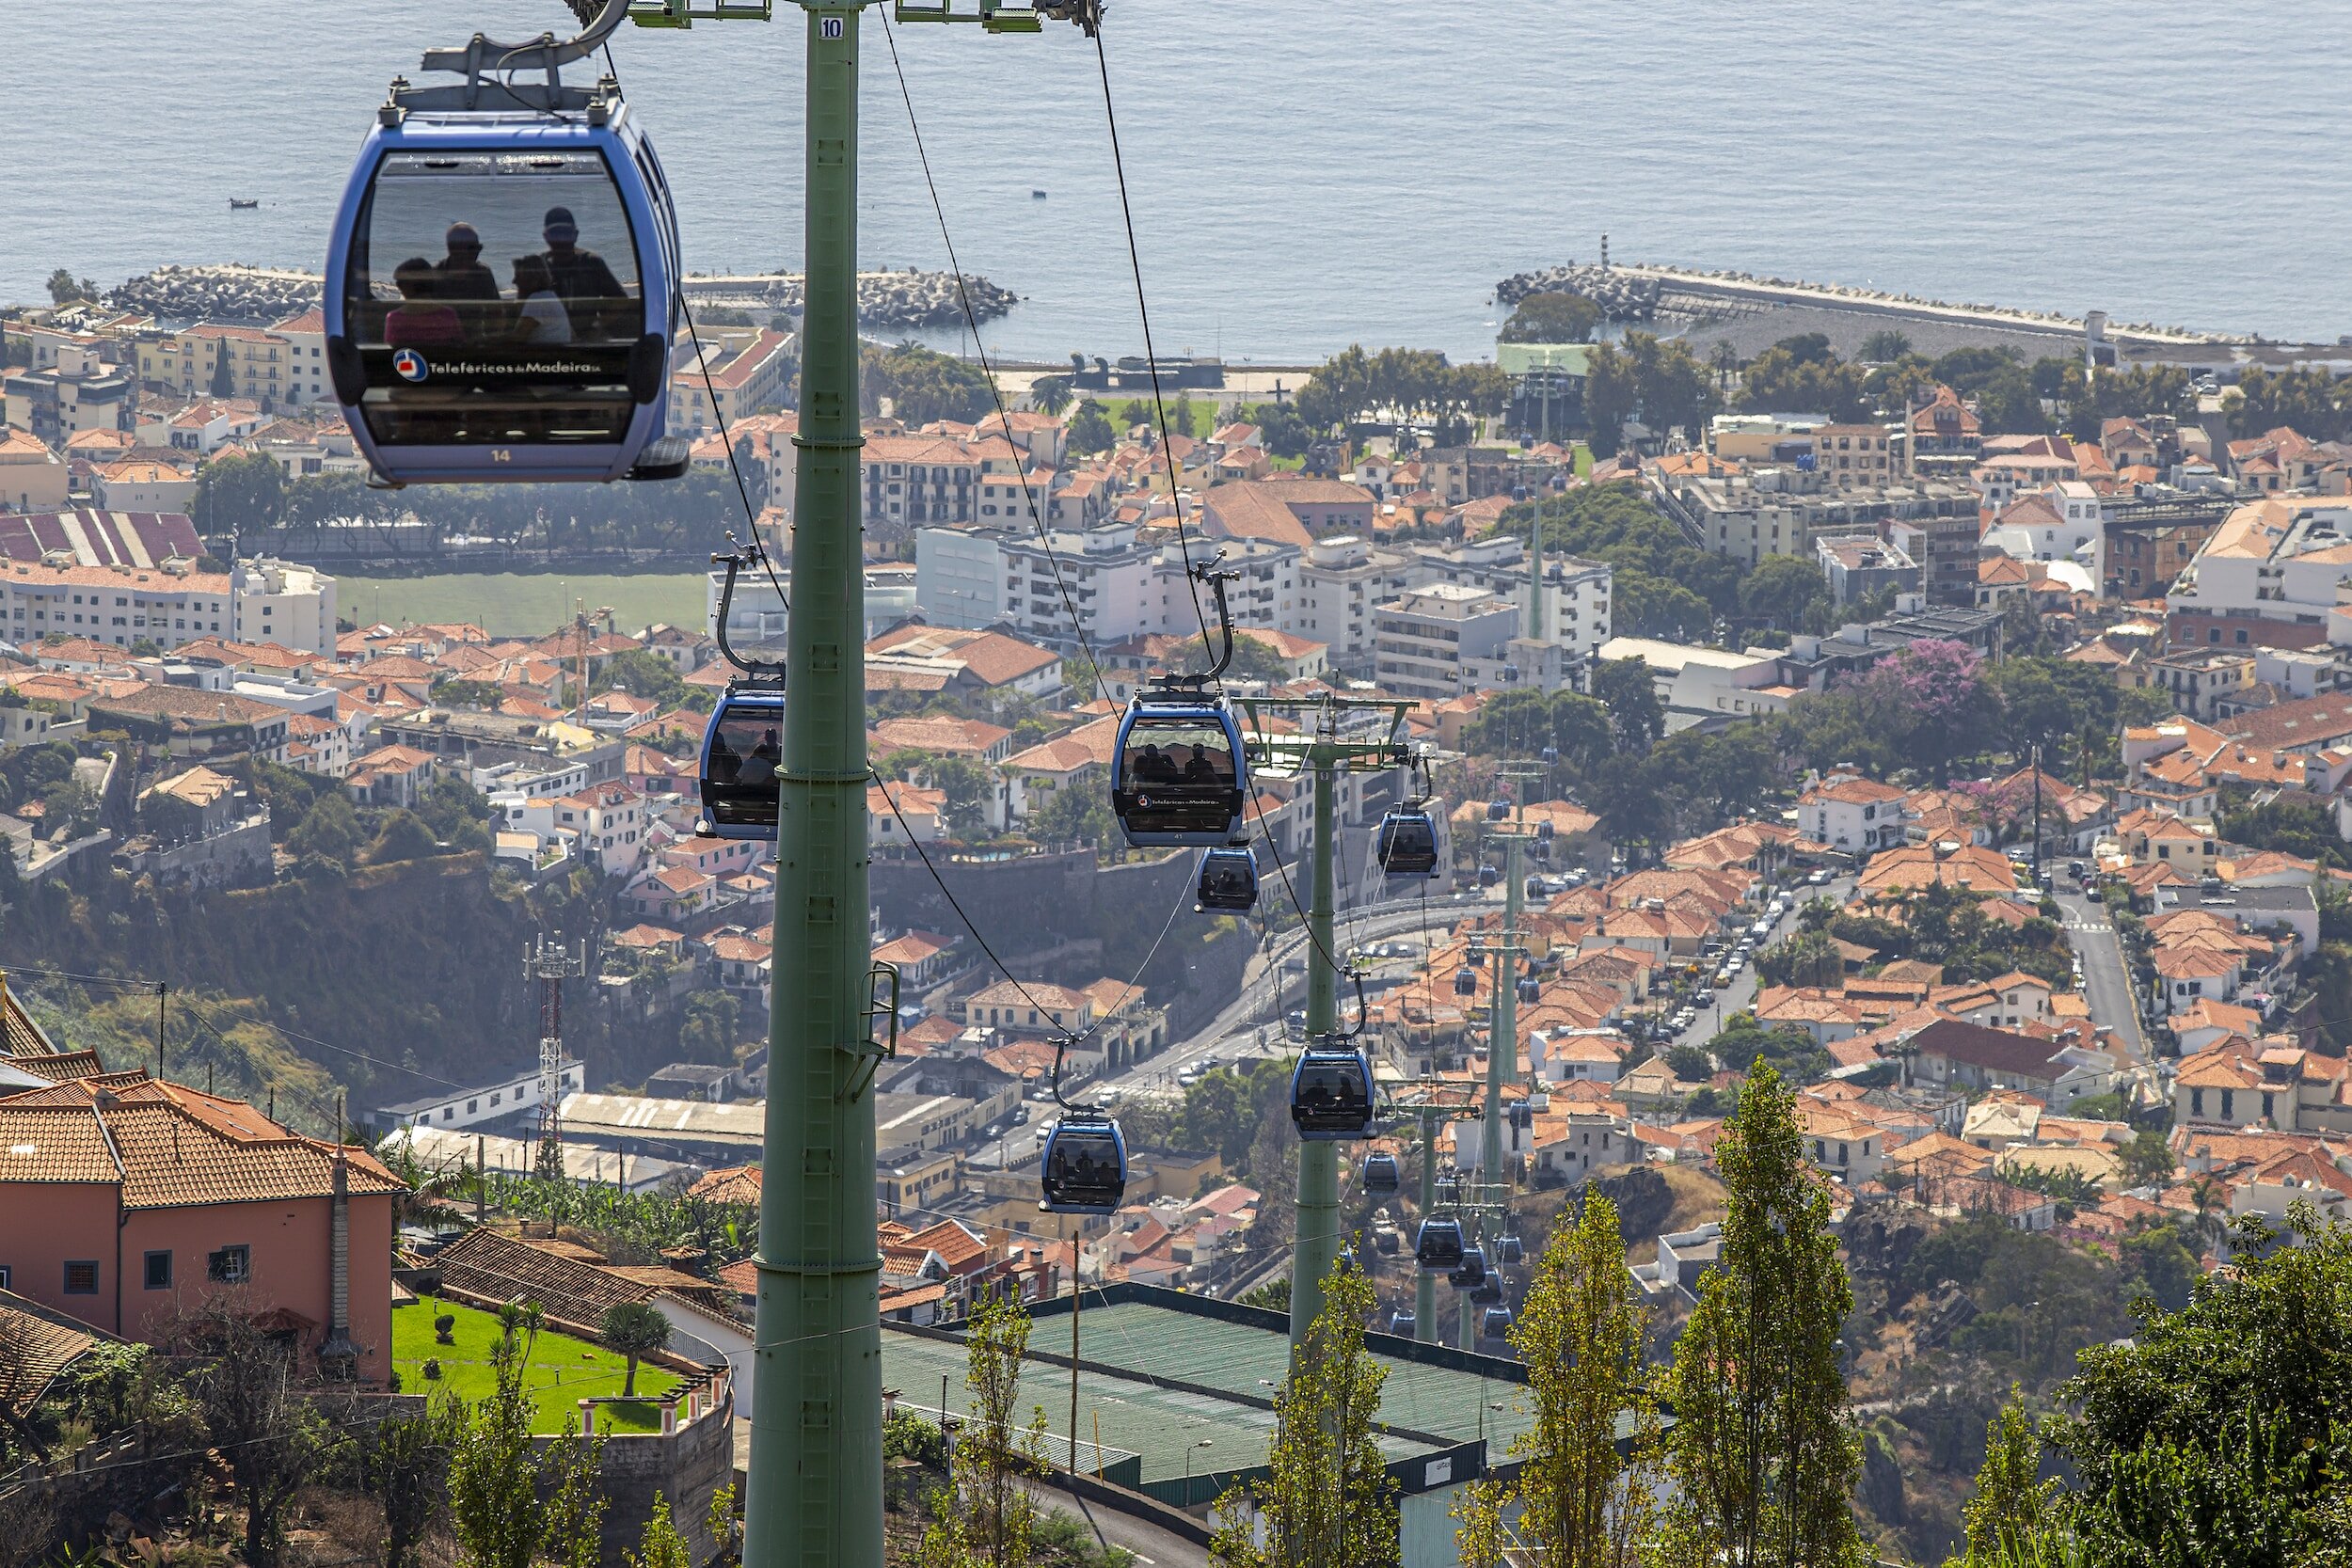 The Funchal cable car